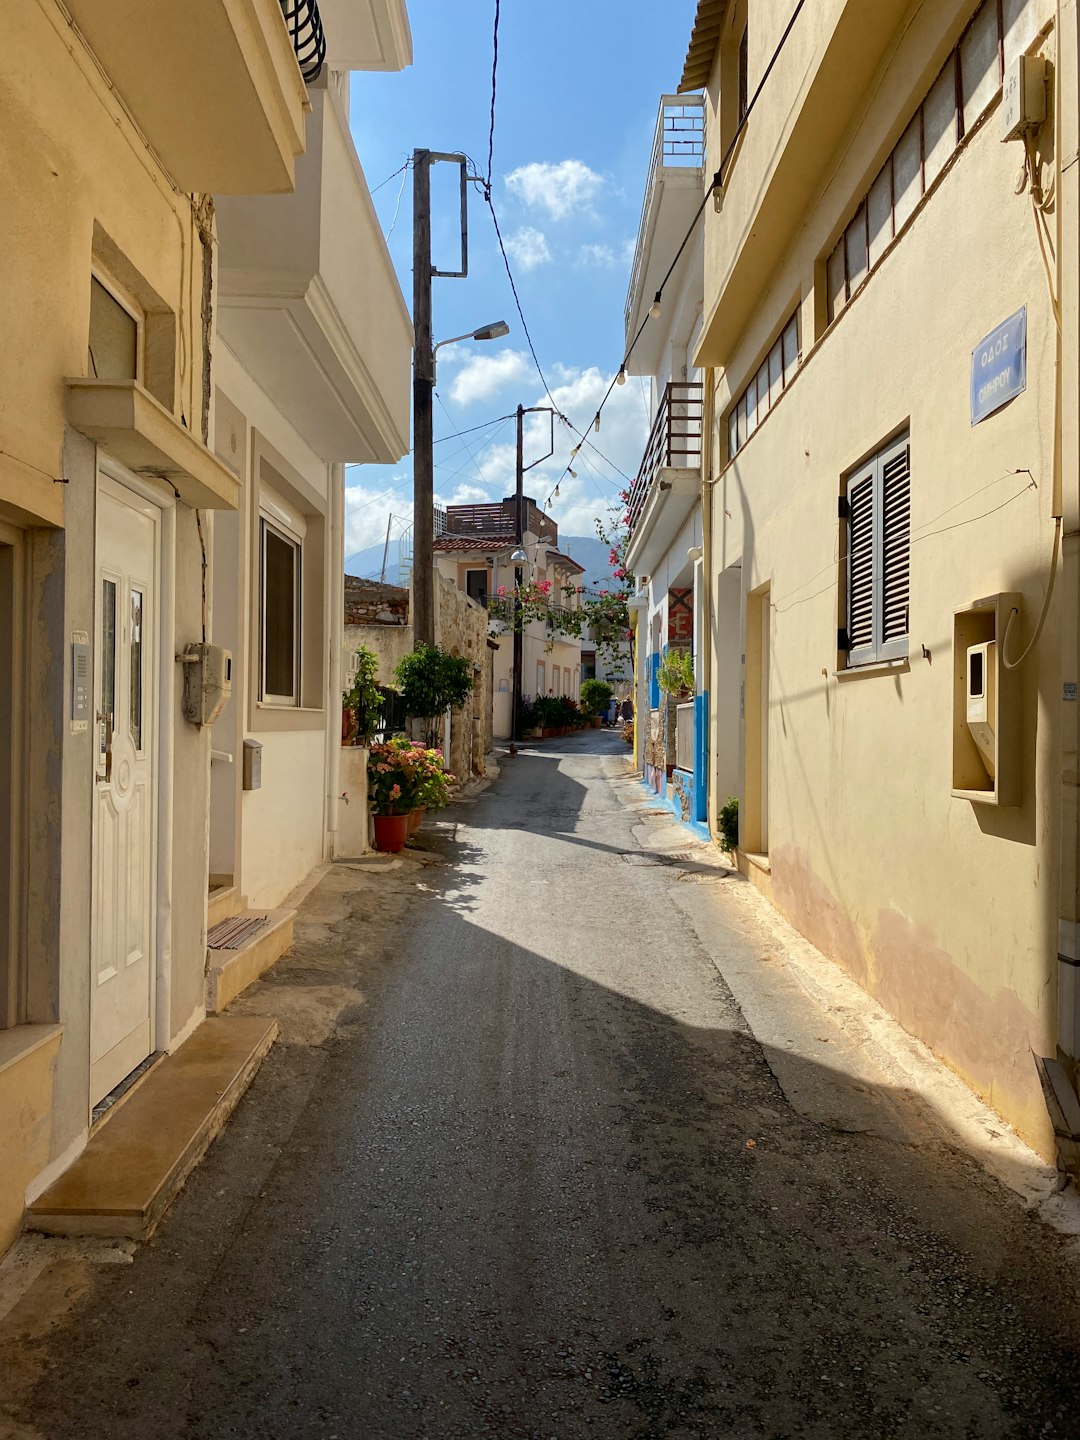 Travel Tips and Stories of Omirou 2–8 in Greece